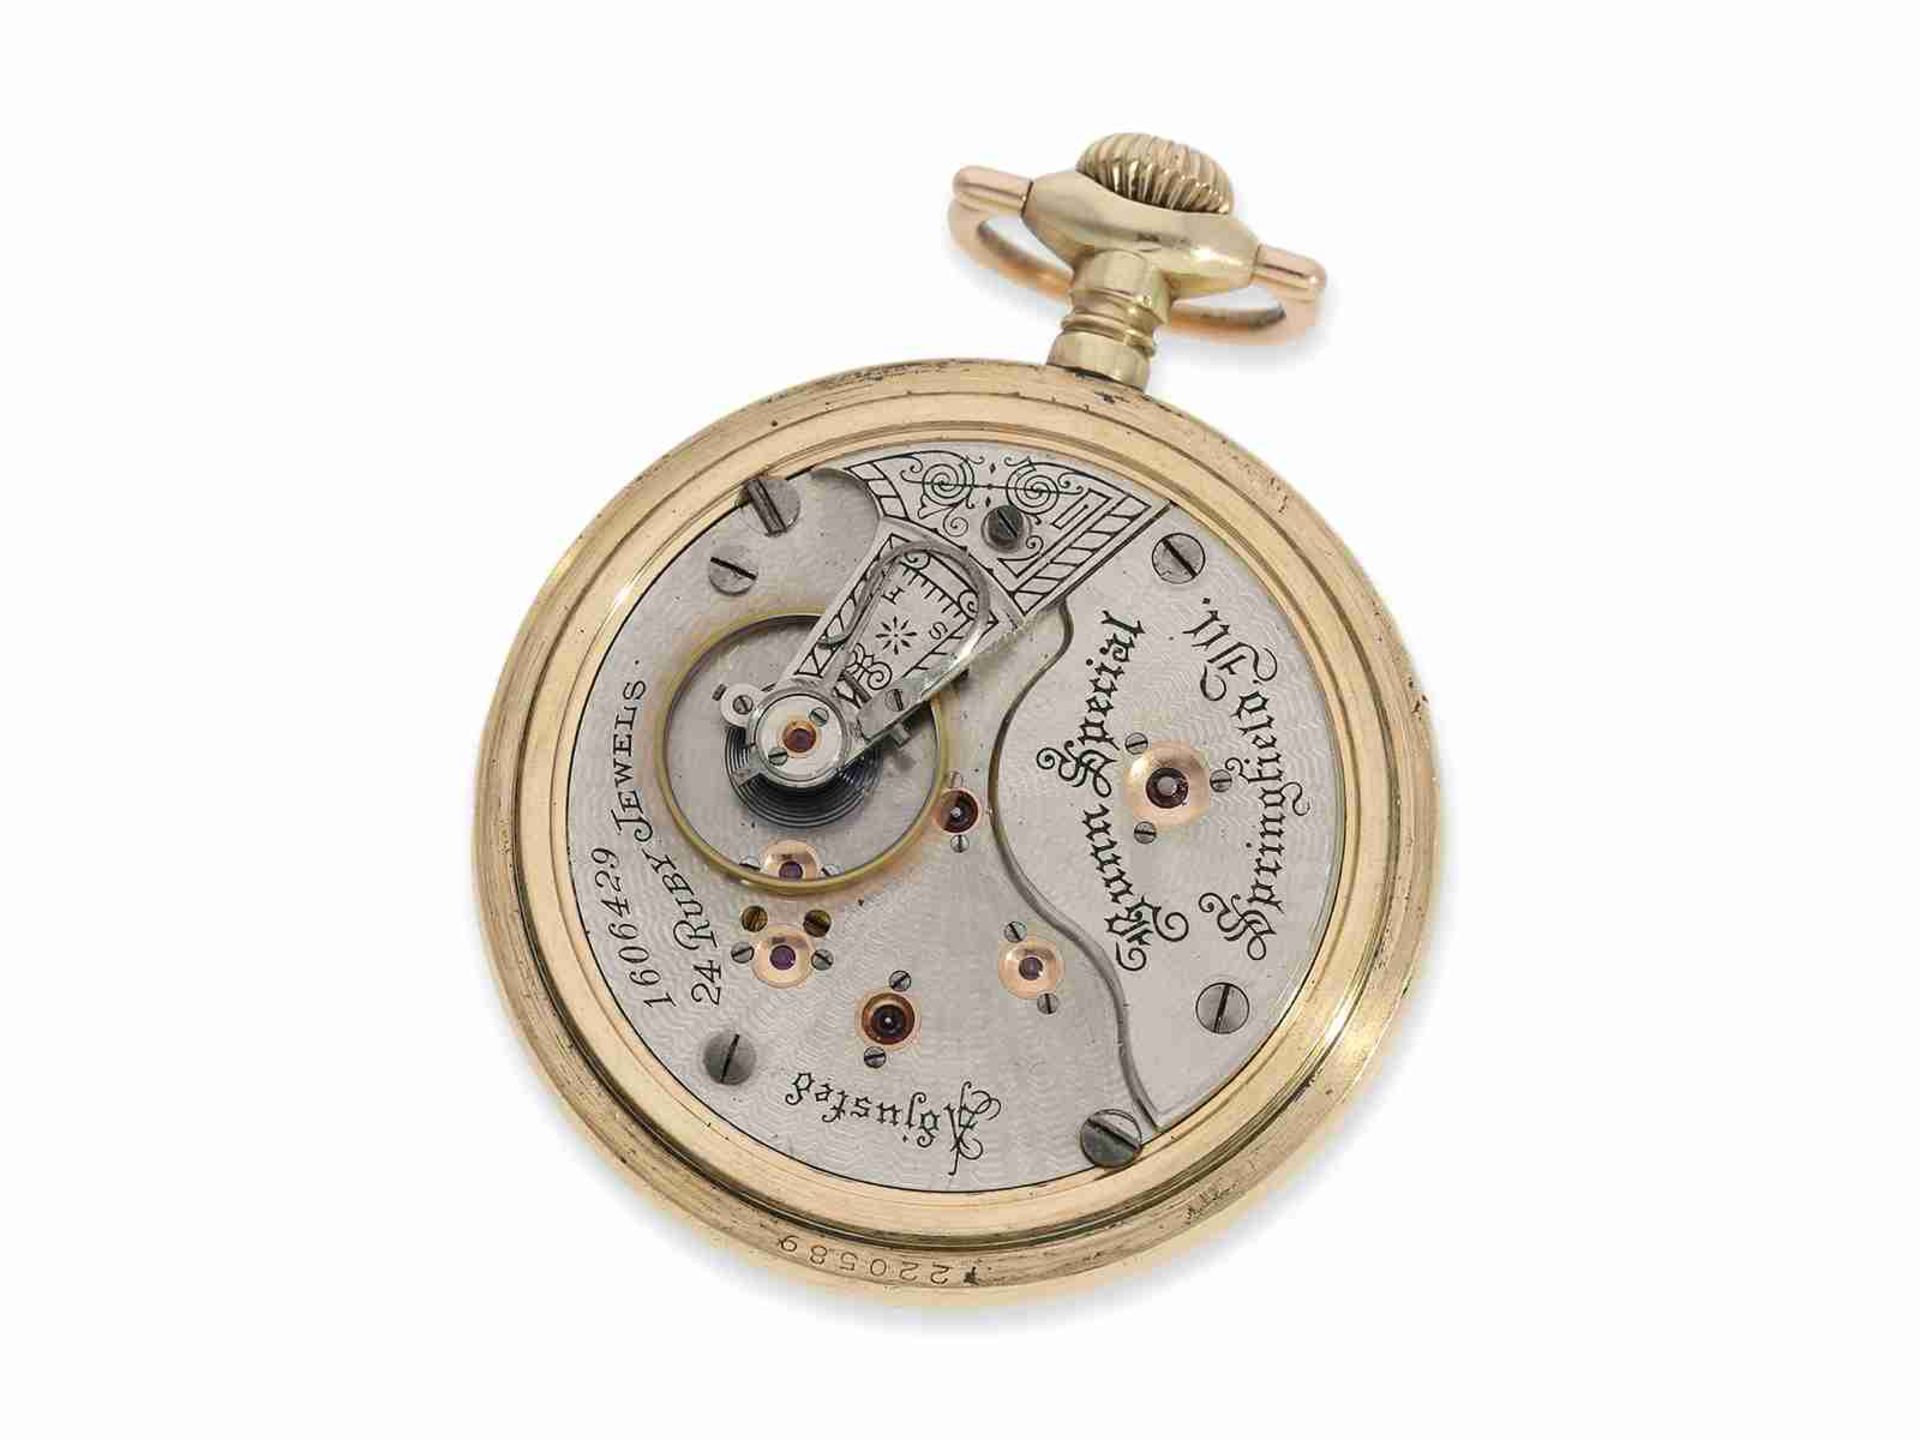 Pocket watch: very rare Illinois railway watch, top model 'Bunn Special Multicolour' with 24 jewels, - Image 2 of 4